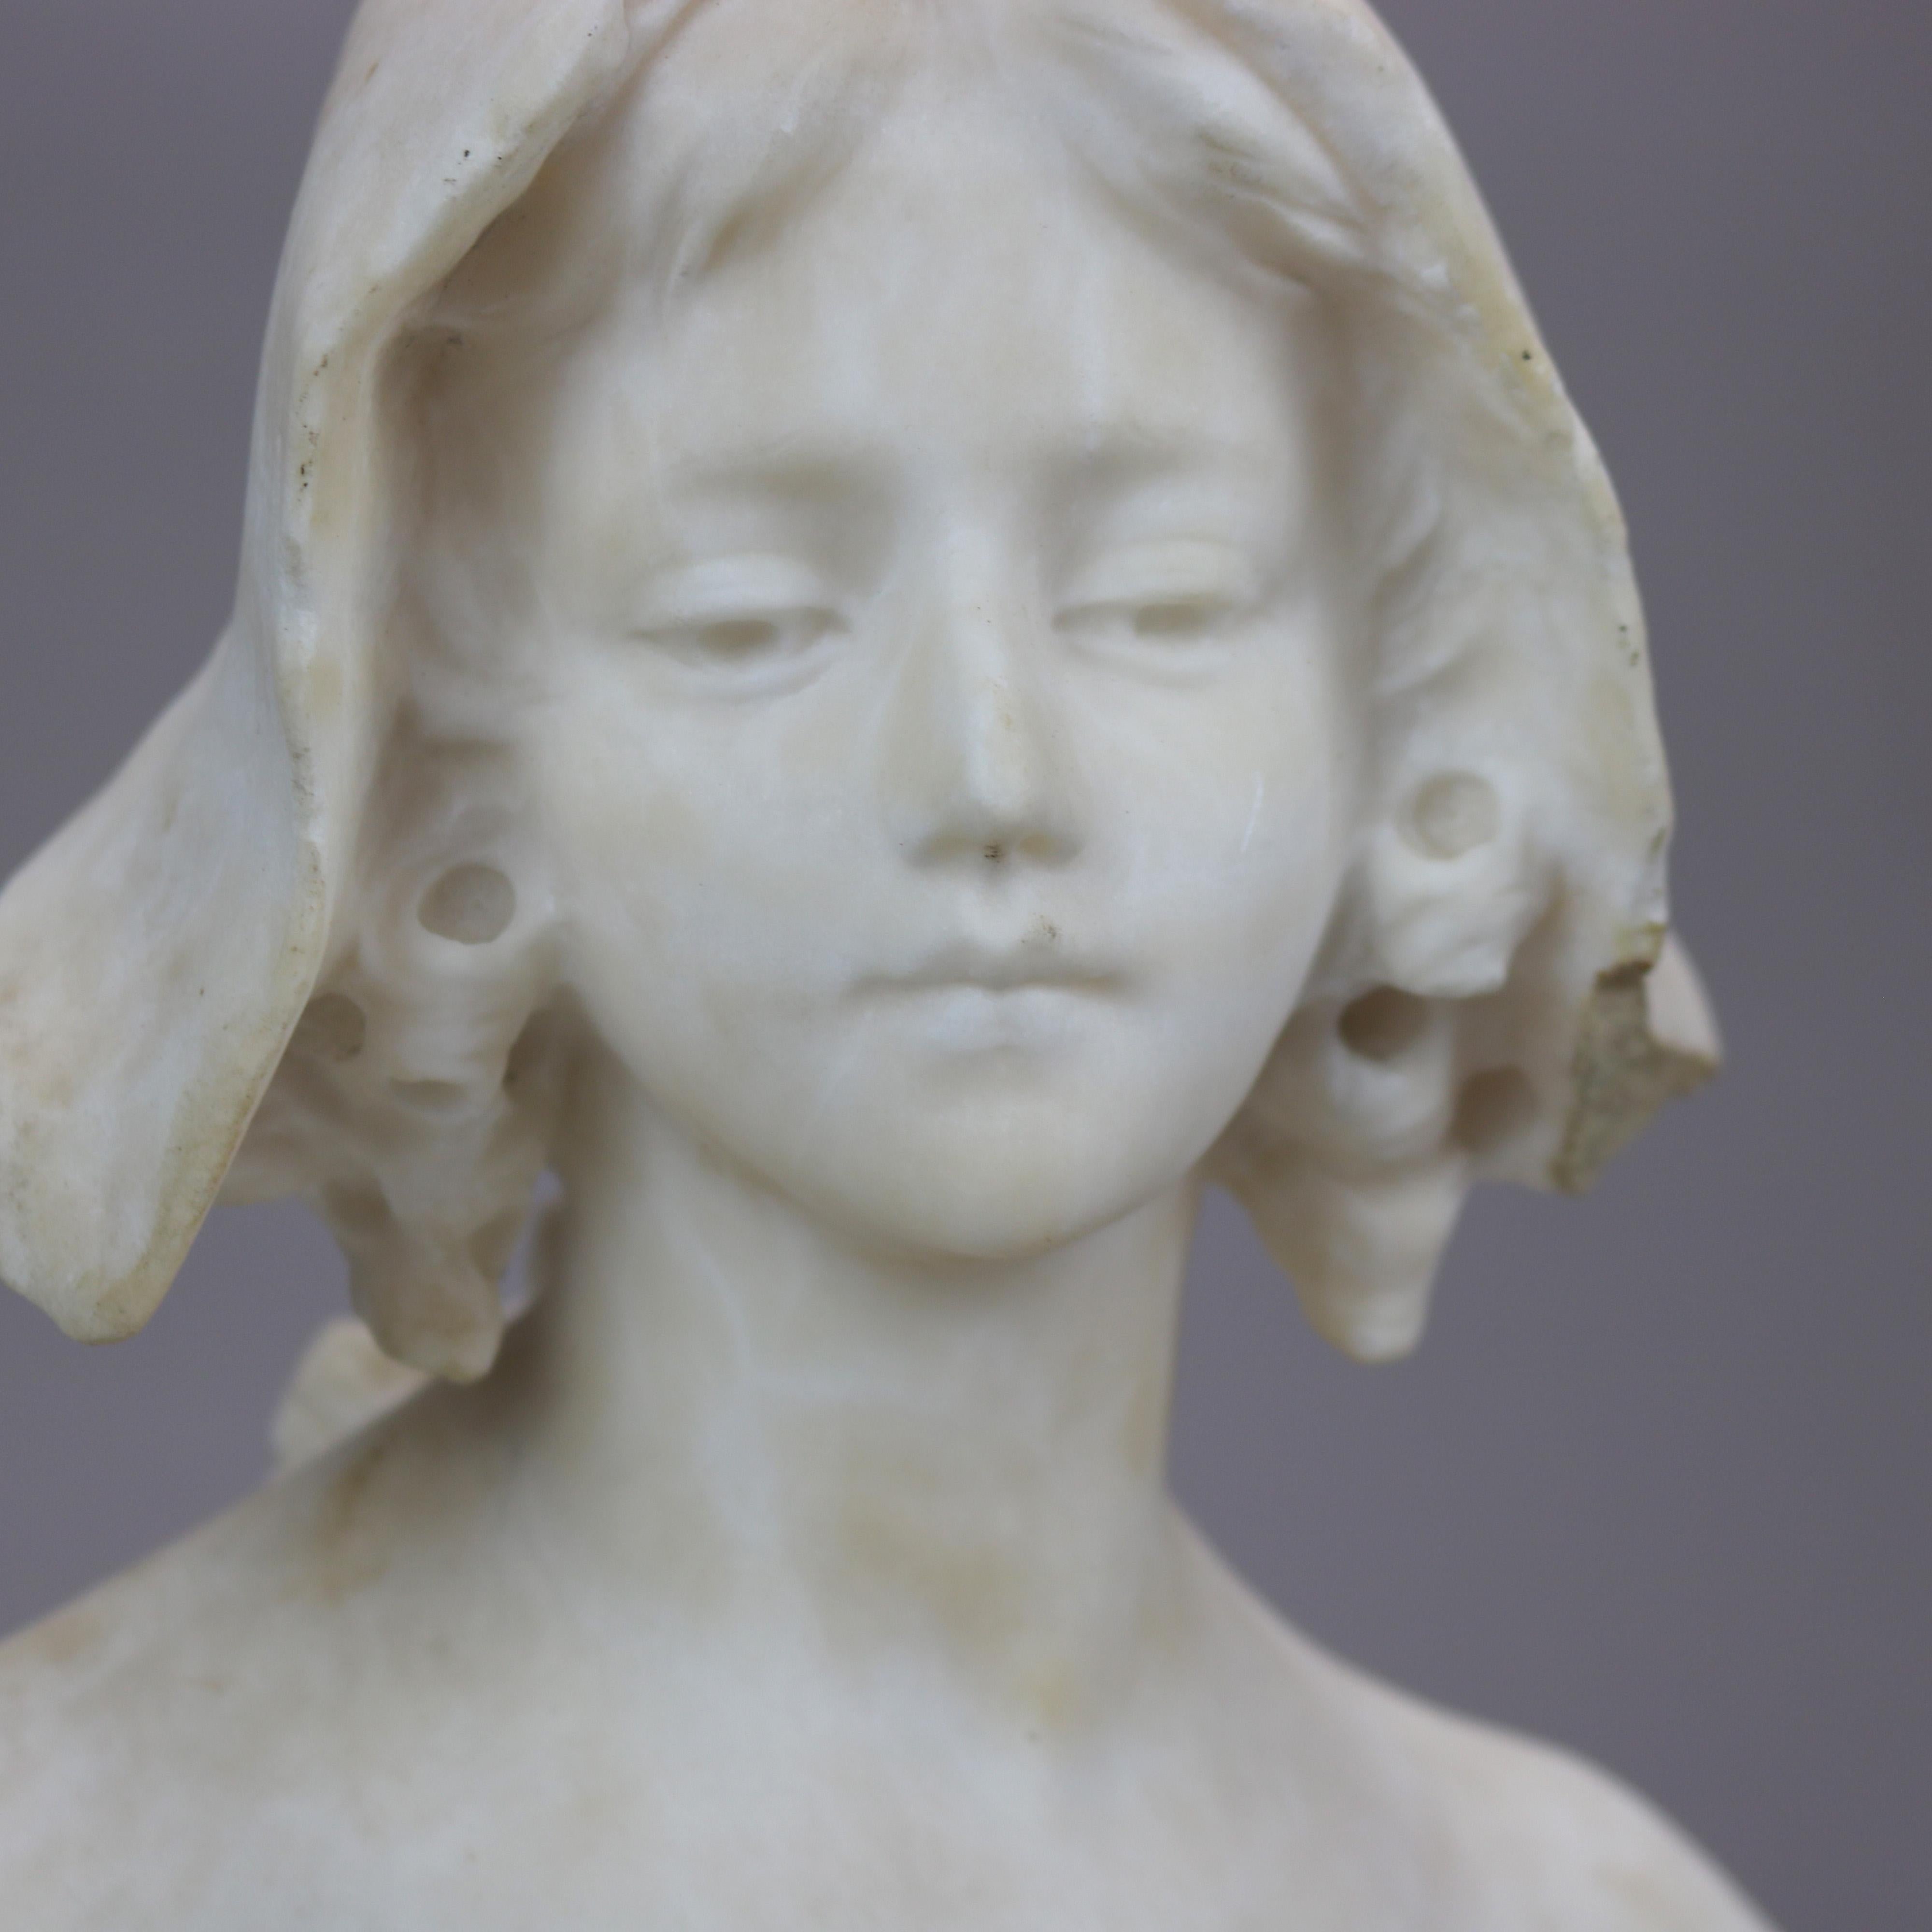 20th Century Carved Alabaster Portrait Sculpture of a Young Woman, Green Marble Plinth c1900